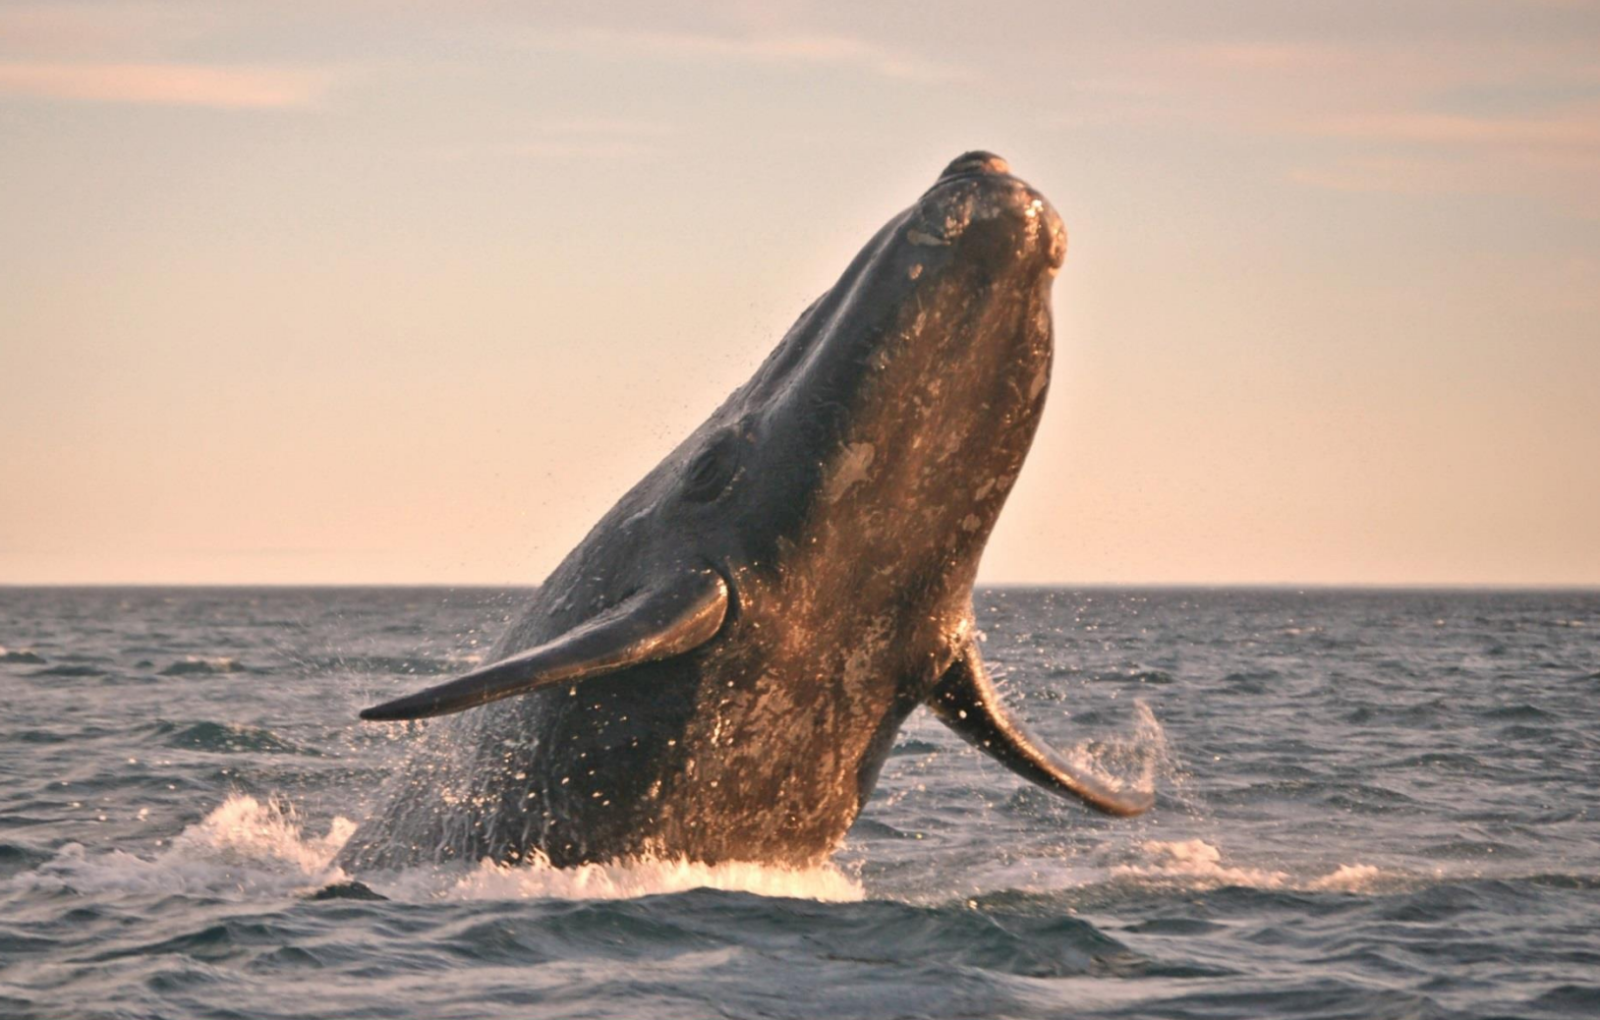 Fisheries and Oceans Canada, North Atlantic right whale, right whale